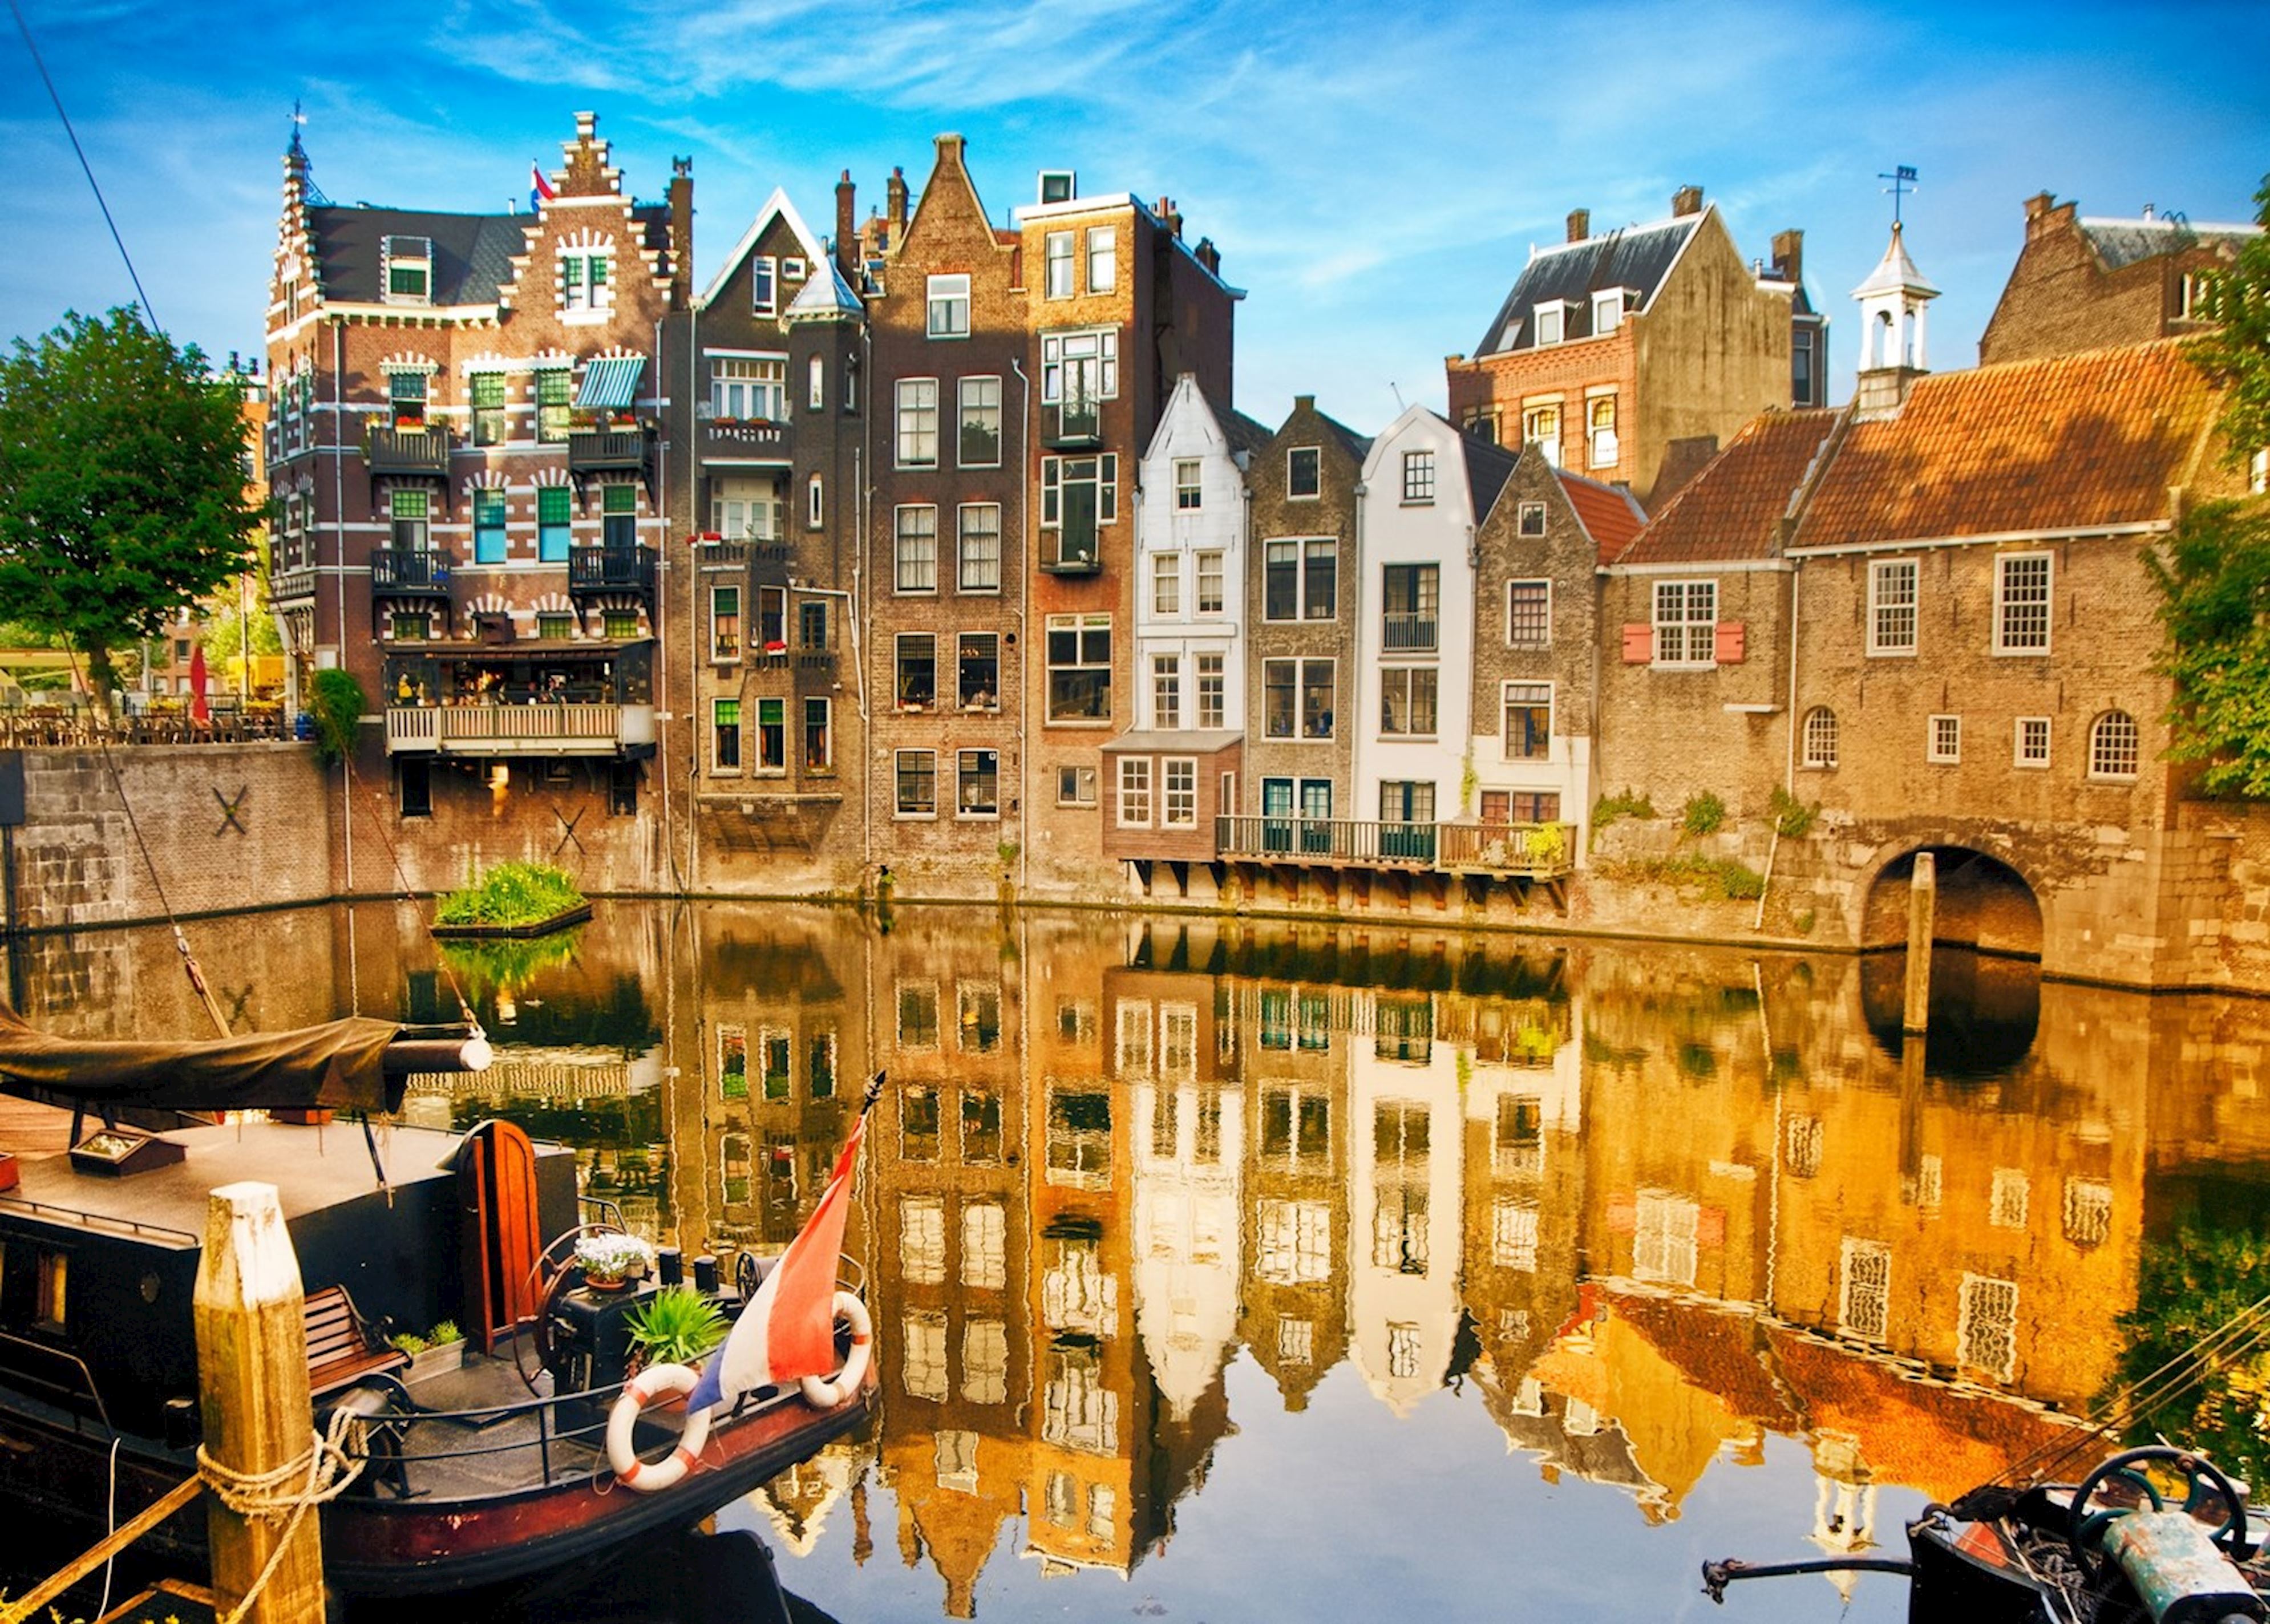 visit-rotterdam-on-a-trip-to-the-netherlands-audley-travel-uk